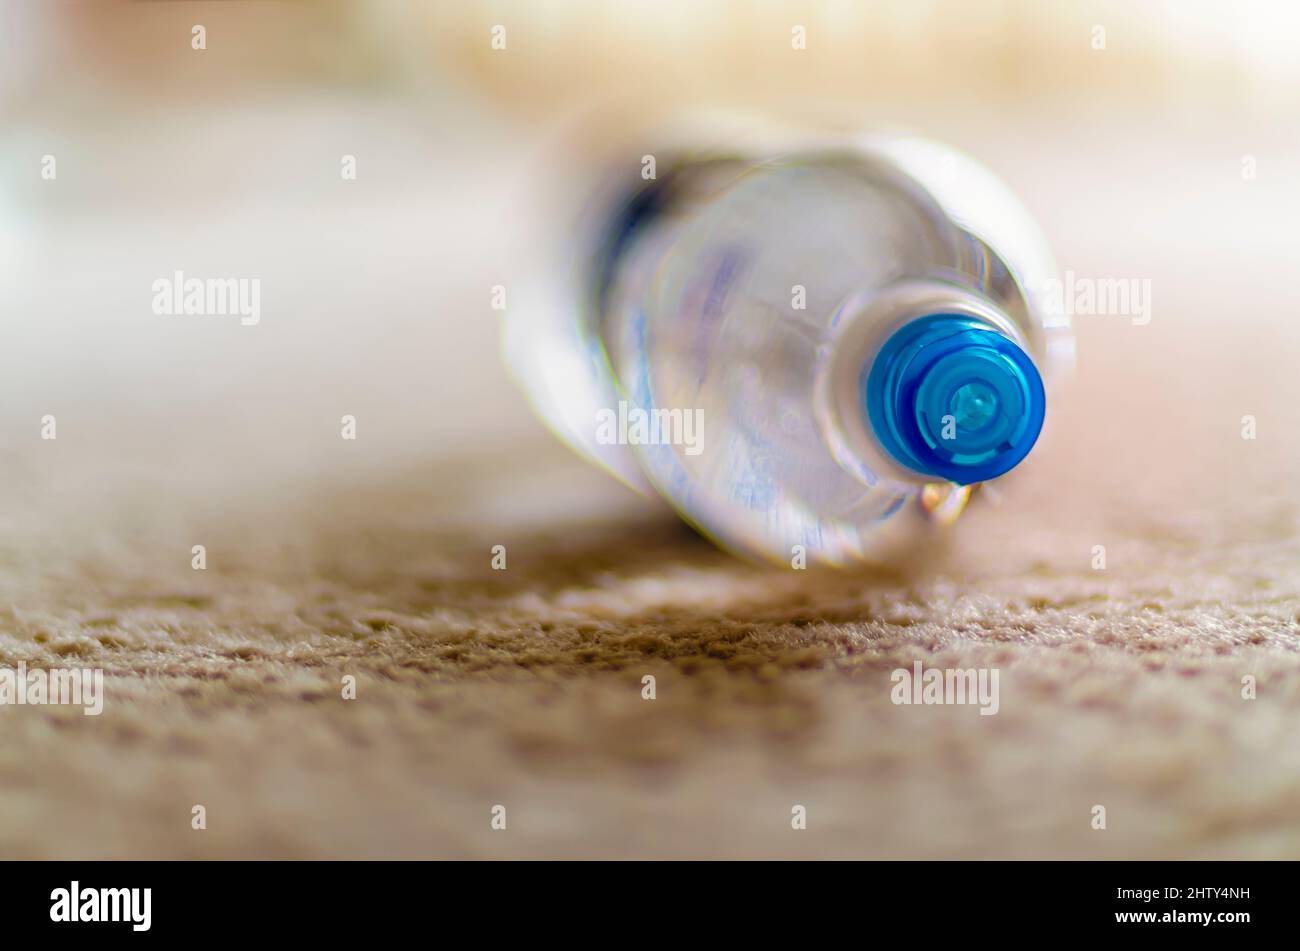 https://c8.alamy.com/comp/2HTY4NH/a-close-up-of-the-lid-or-cap-of-a-plastic-water-bottle-lying-on-a-beige-coloured-carpet-2HTY4NH.jpg